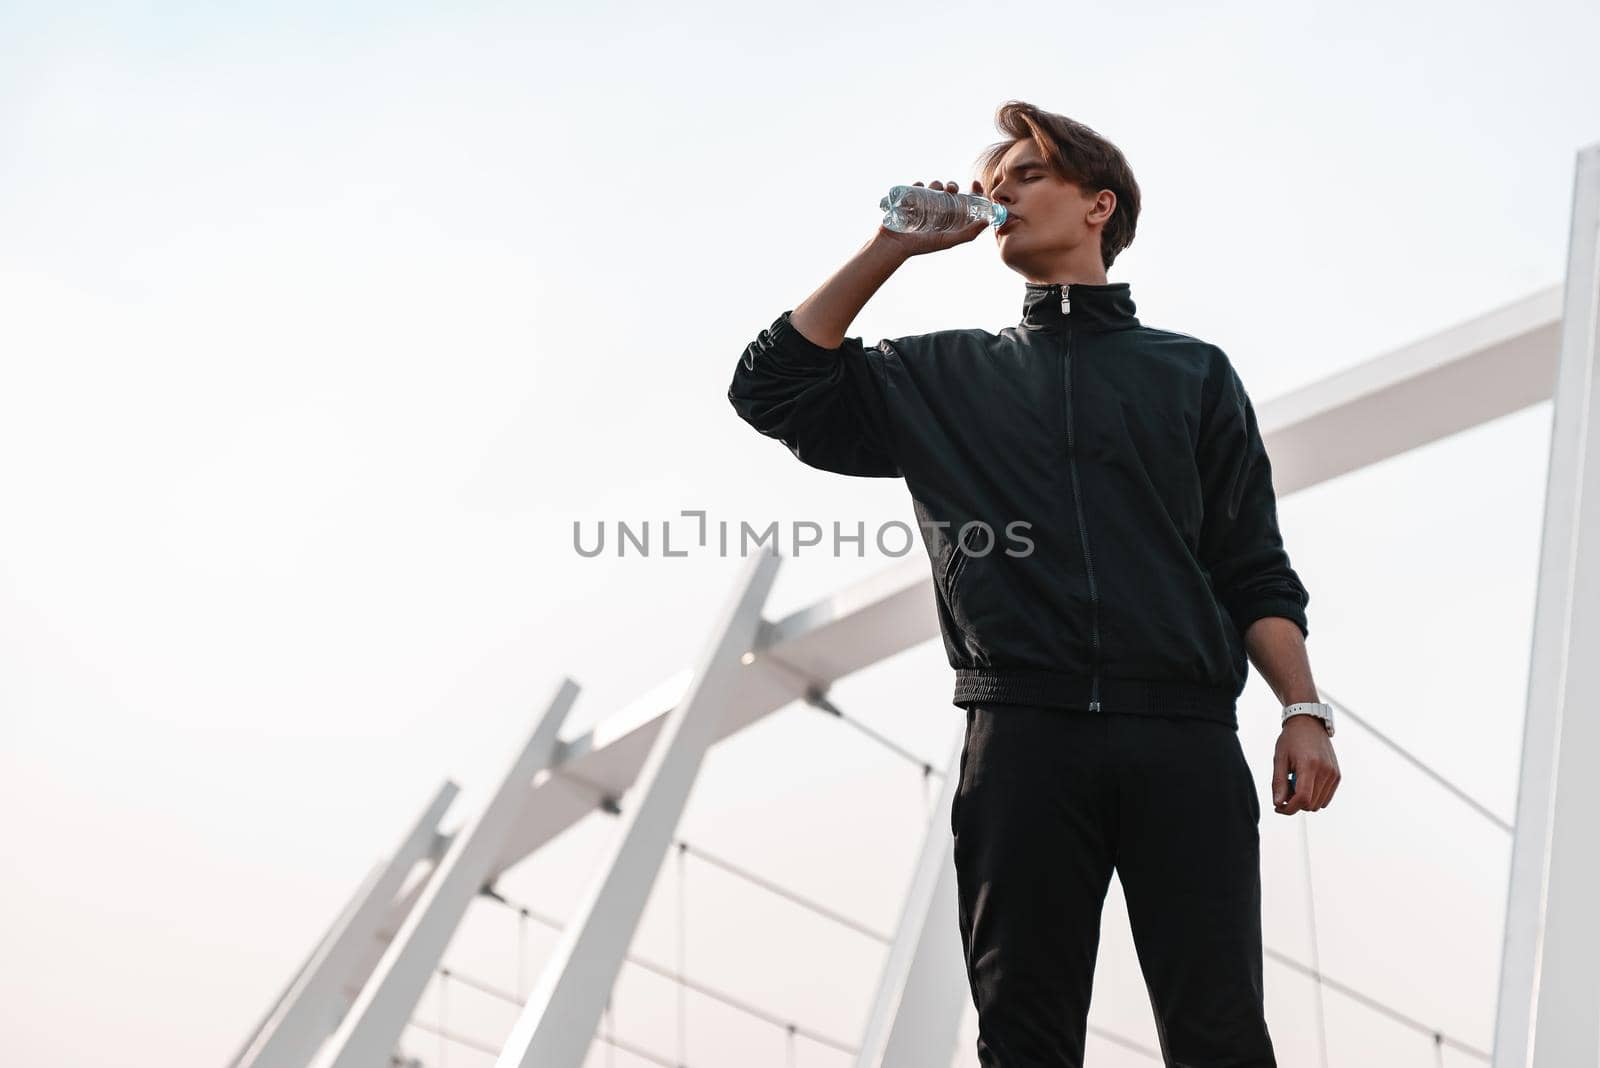 Young stortsman is drinking water near the stadium. He wears black sport clothes